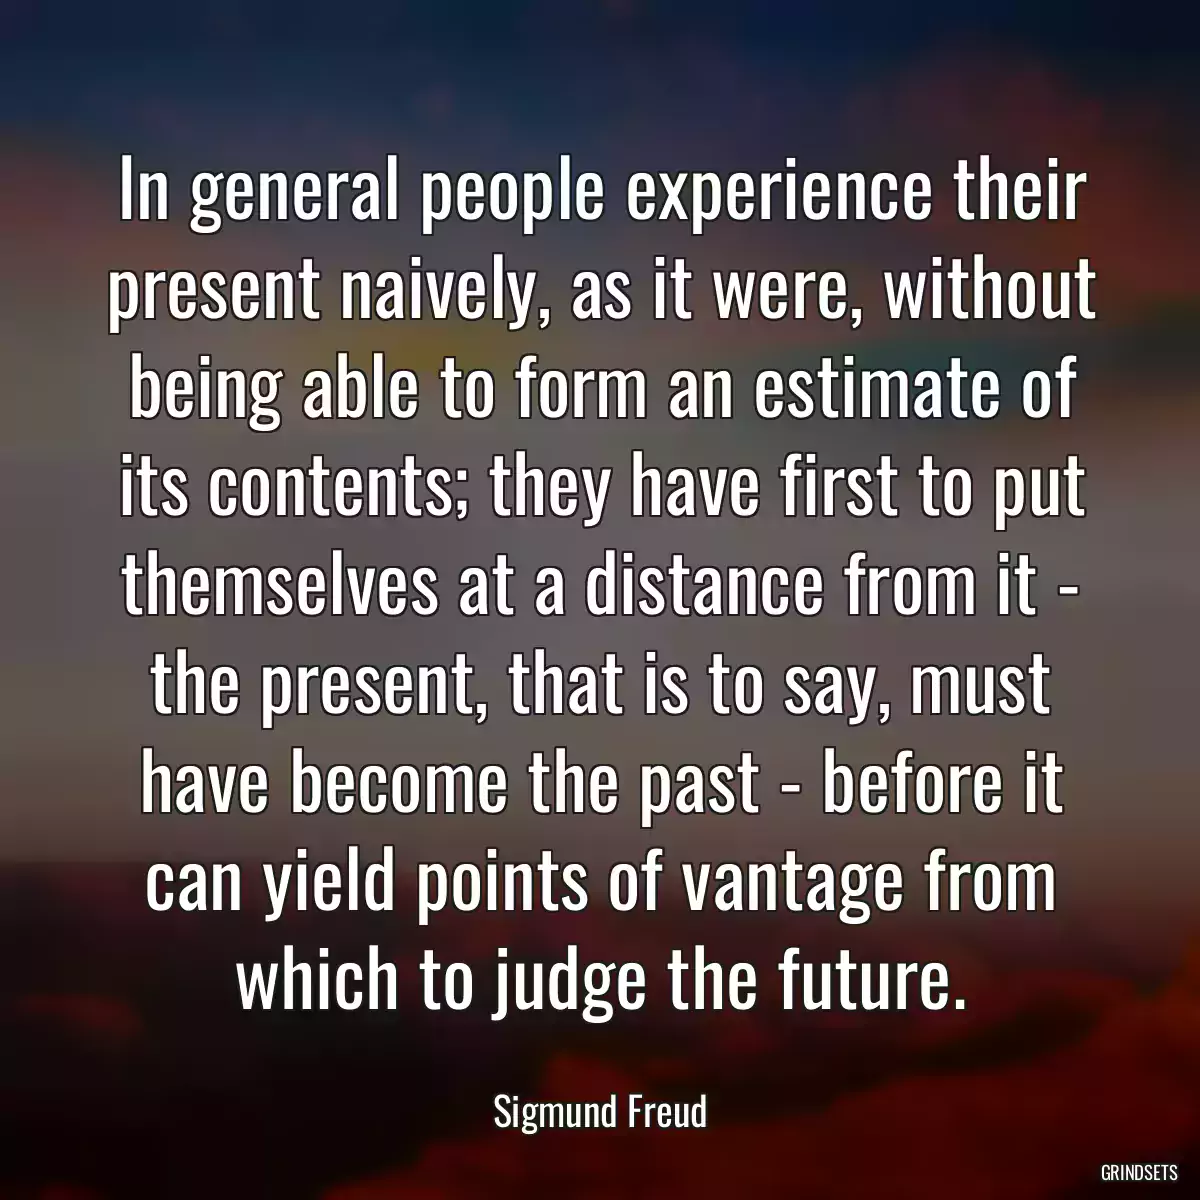 In general people experience their present naively, as it were, without being able to form an estimate of its contents; they have first to put themselves at a distance from it - the present, that is to say, must have become the past - before it can yield points of vantage from which to judge the future.